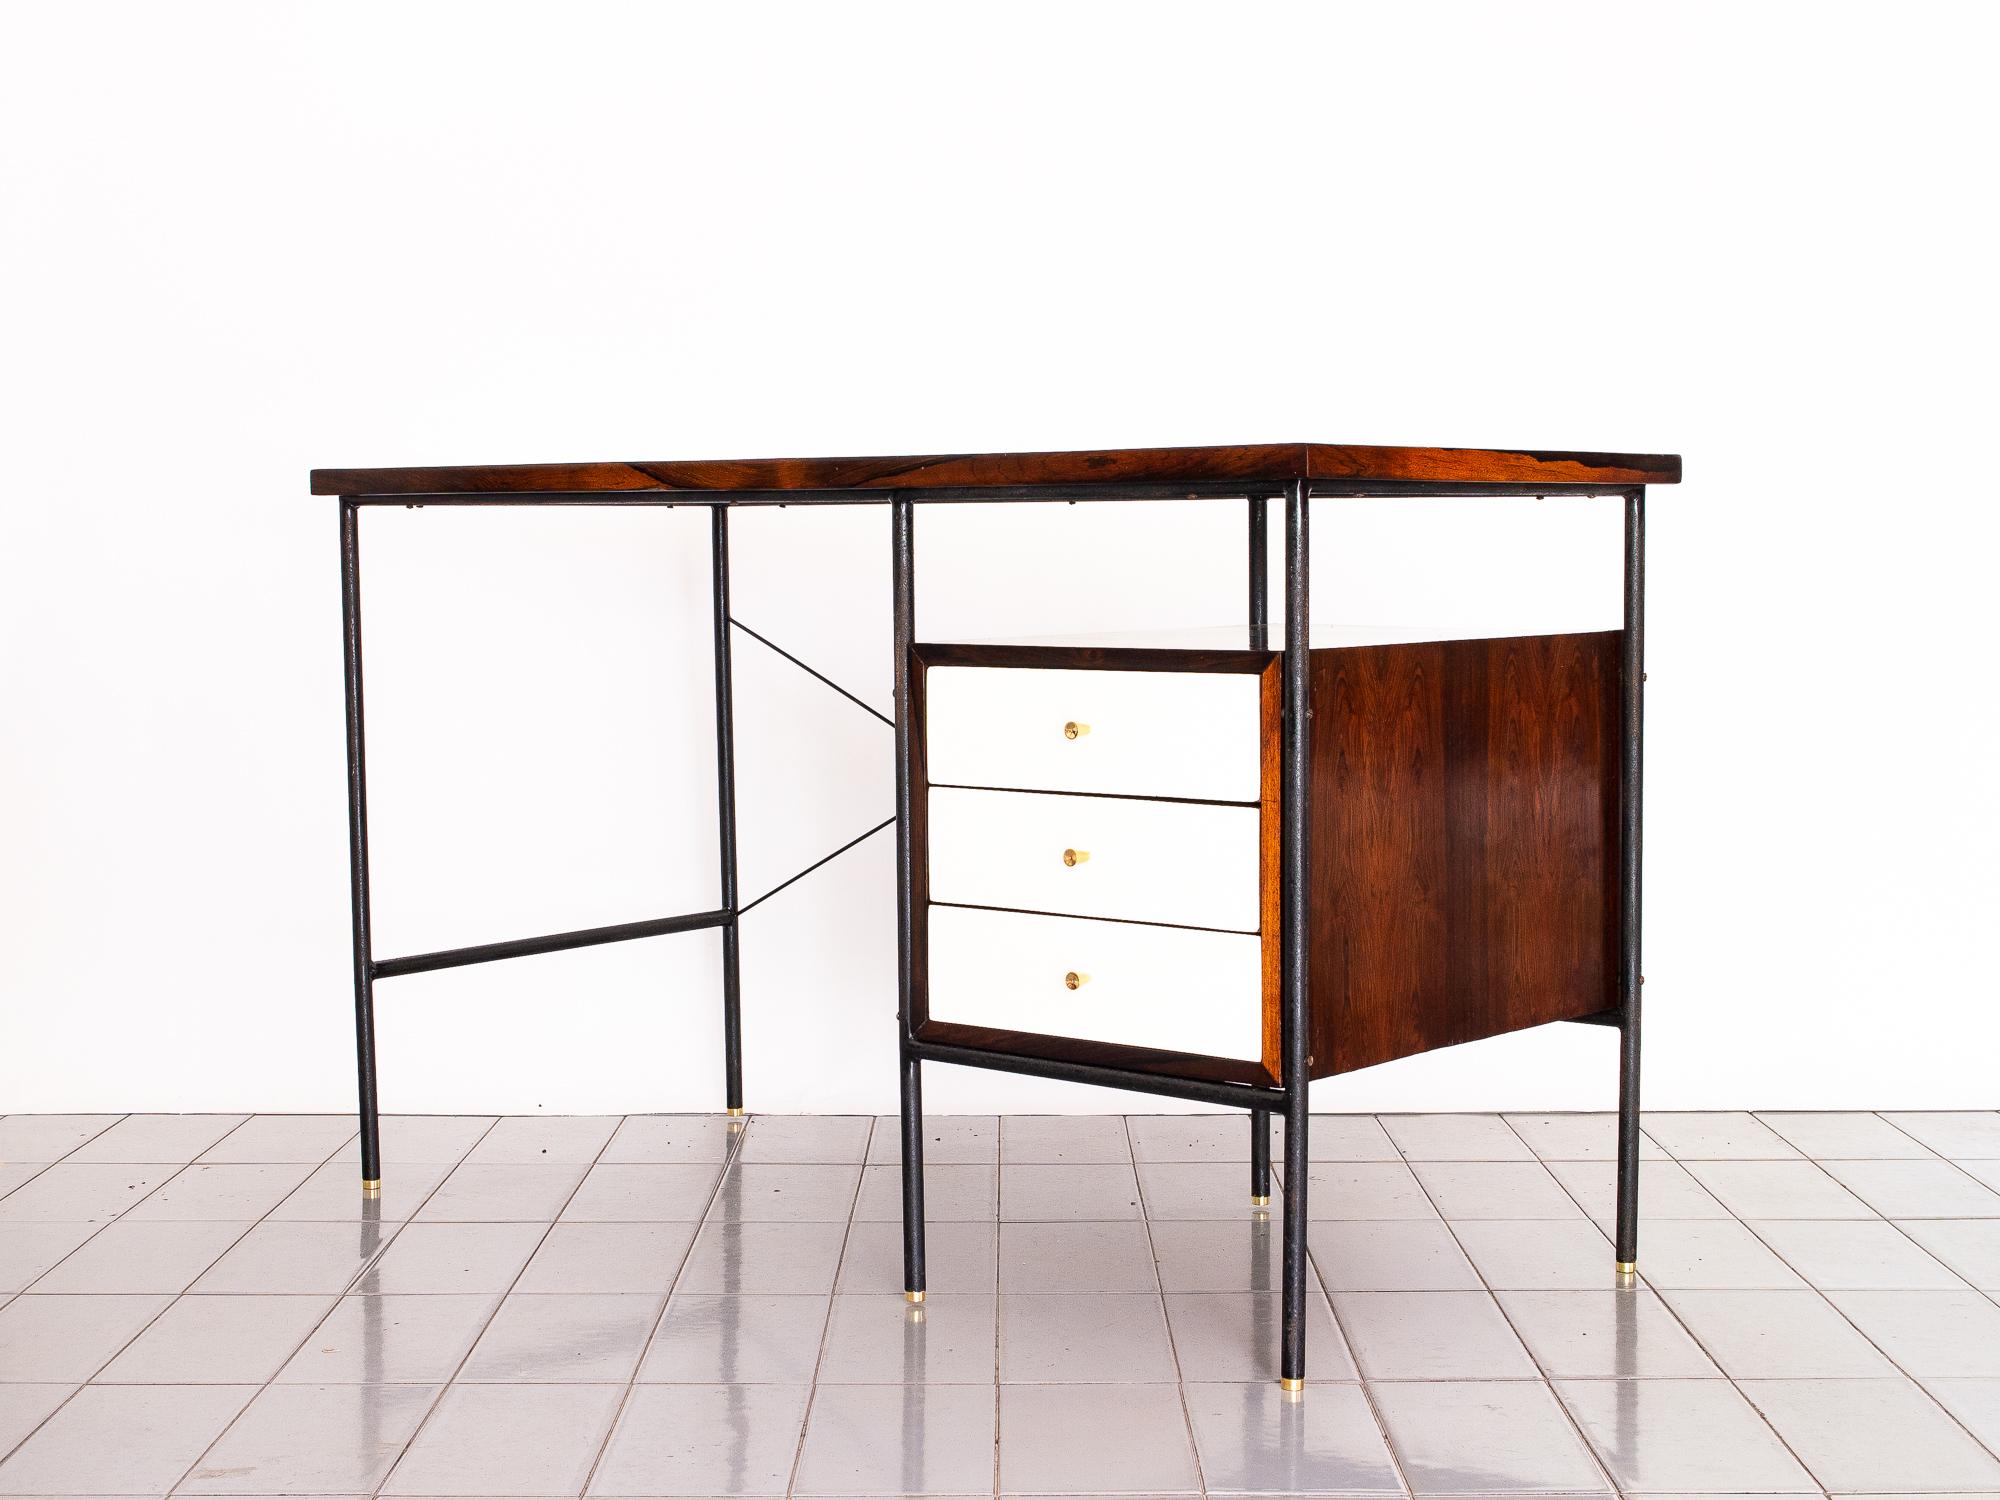 The small '1015' desk is an iconic piece of Brazilian design, with striking contrast between the white Formica and the Iron - Rosewood. Brass feet and pulls complete the details of a perfect Minimalist piece. 

The desk was designed in the 1950's by